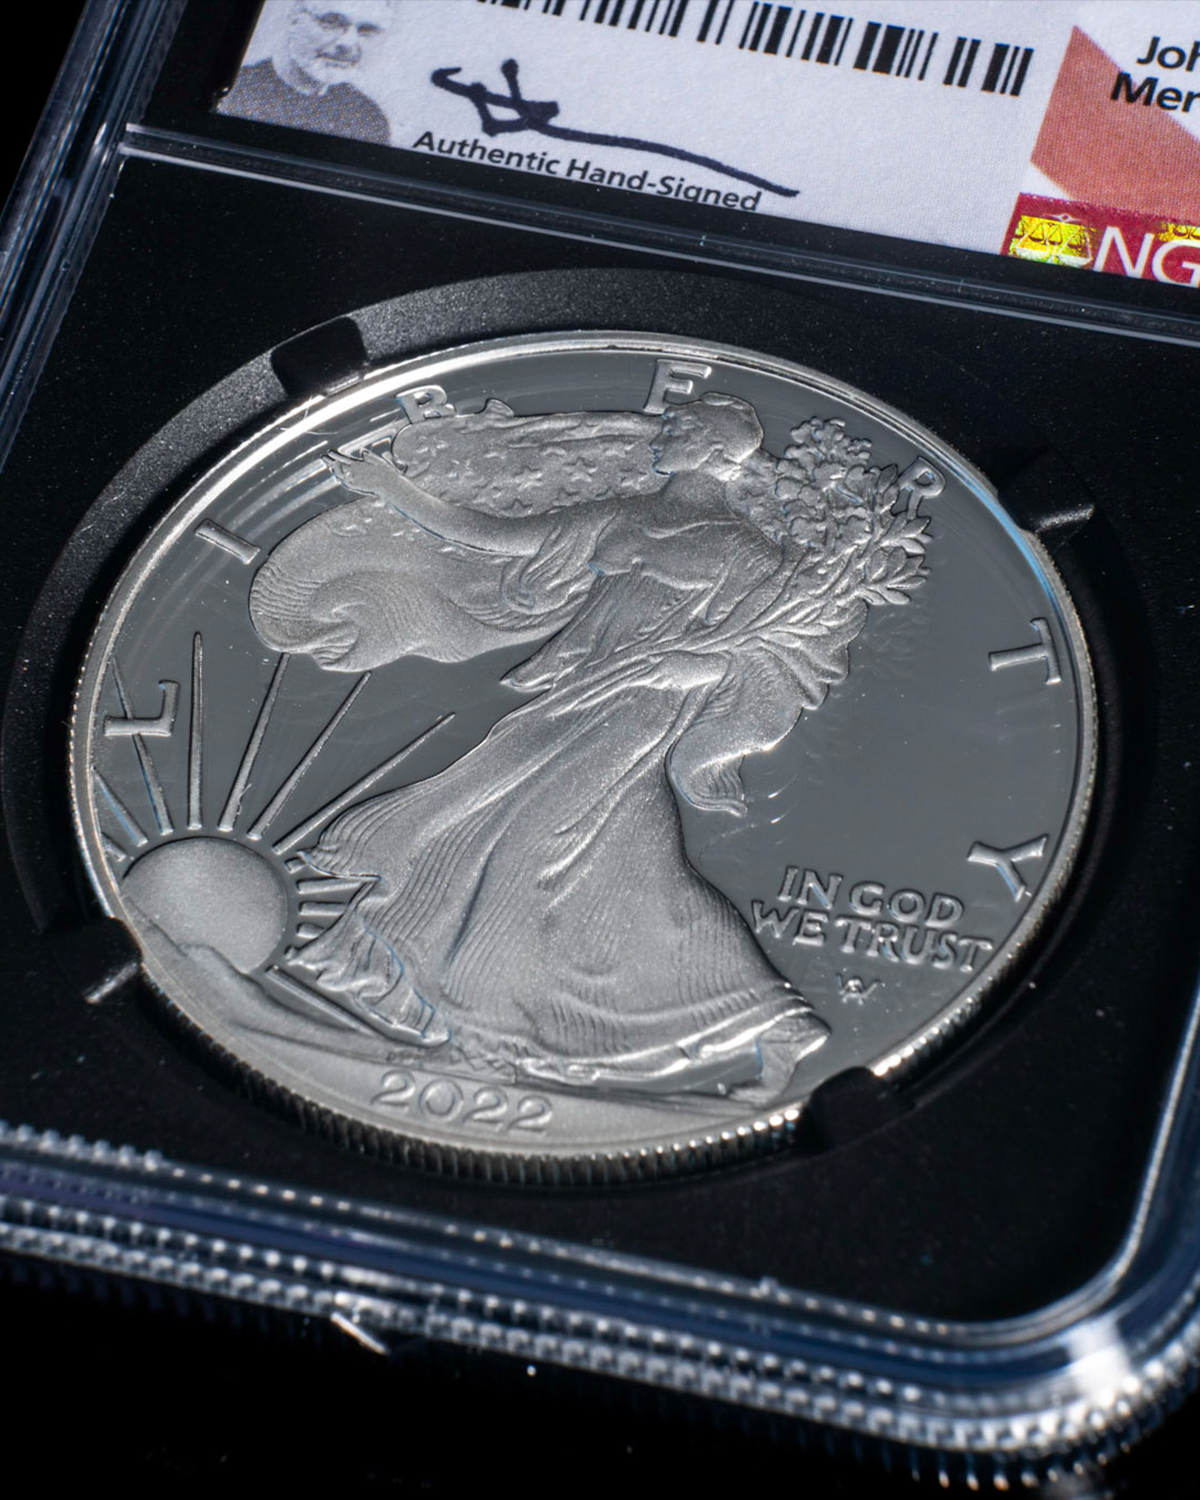 2022 W $1 Silver Eagle | Advanced Releases PF70 Ultra Cameo NGC | John Mercanti Autographed